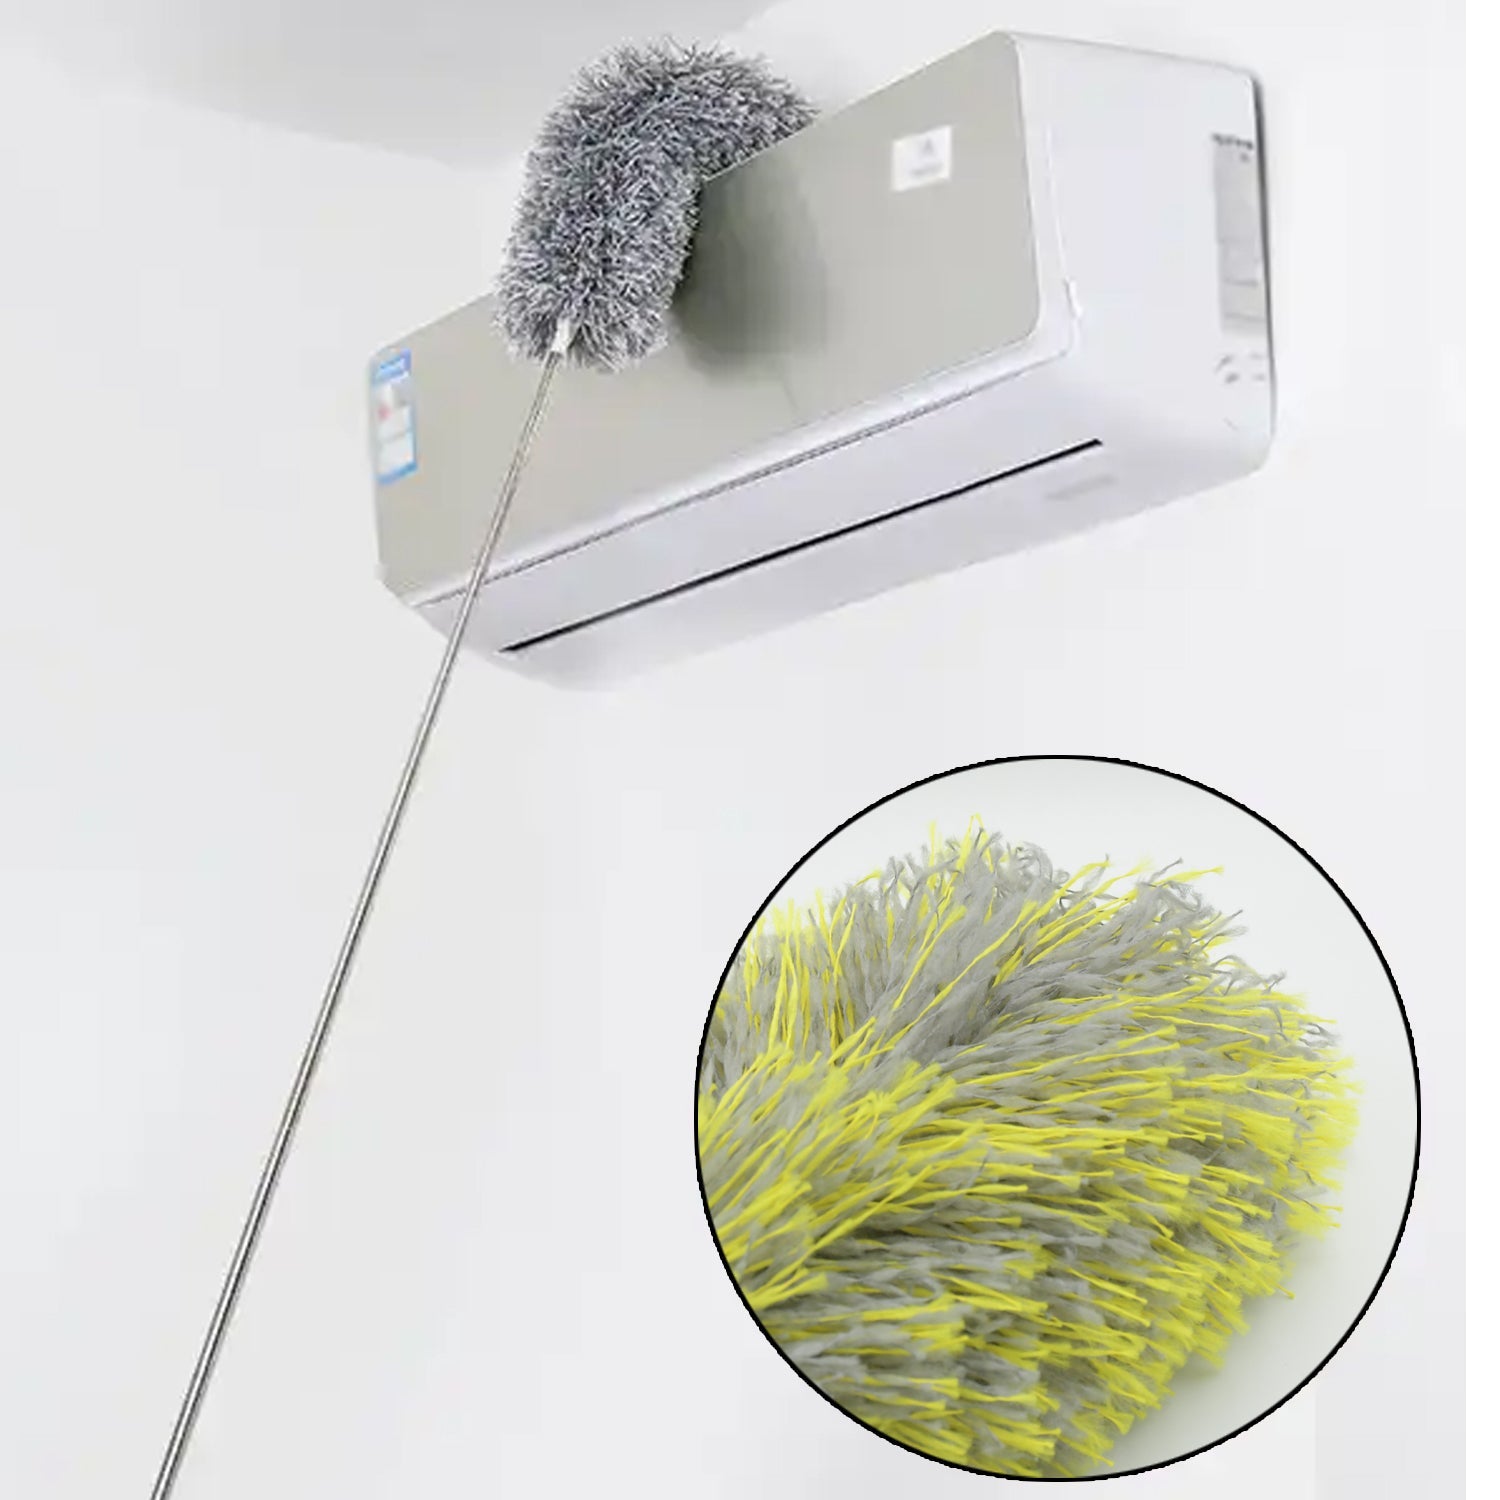 8862 Long Handle, Microfiber Duster for Cleaning, Microfiber Hand Duster Washable Microfiber Cleaning Tool Extendable Dusters for Cleaning Office, Car, Computer, Air Condition, Washable Duster (62Cm)